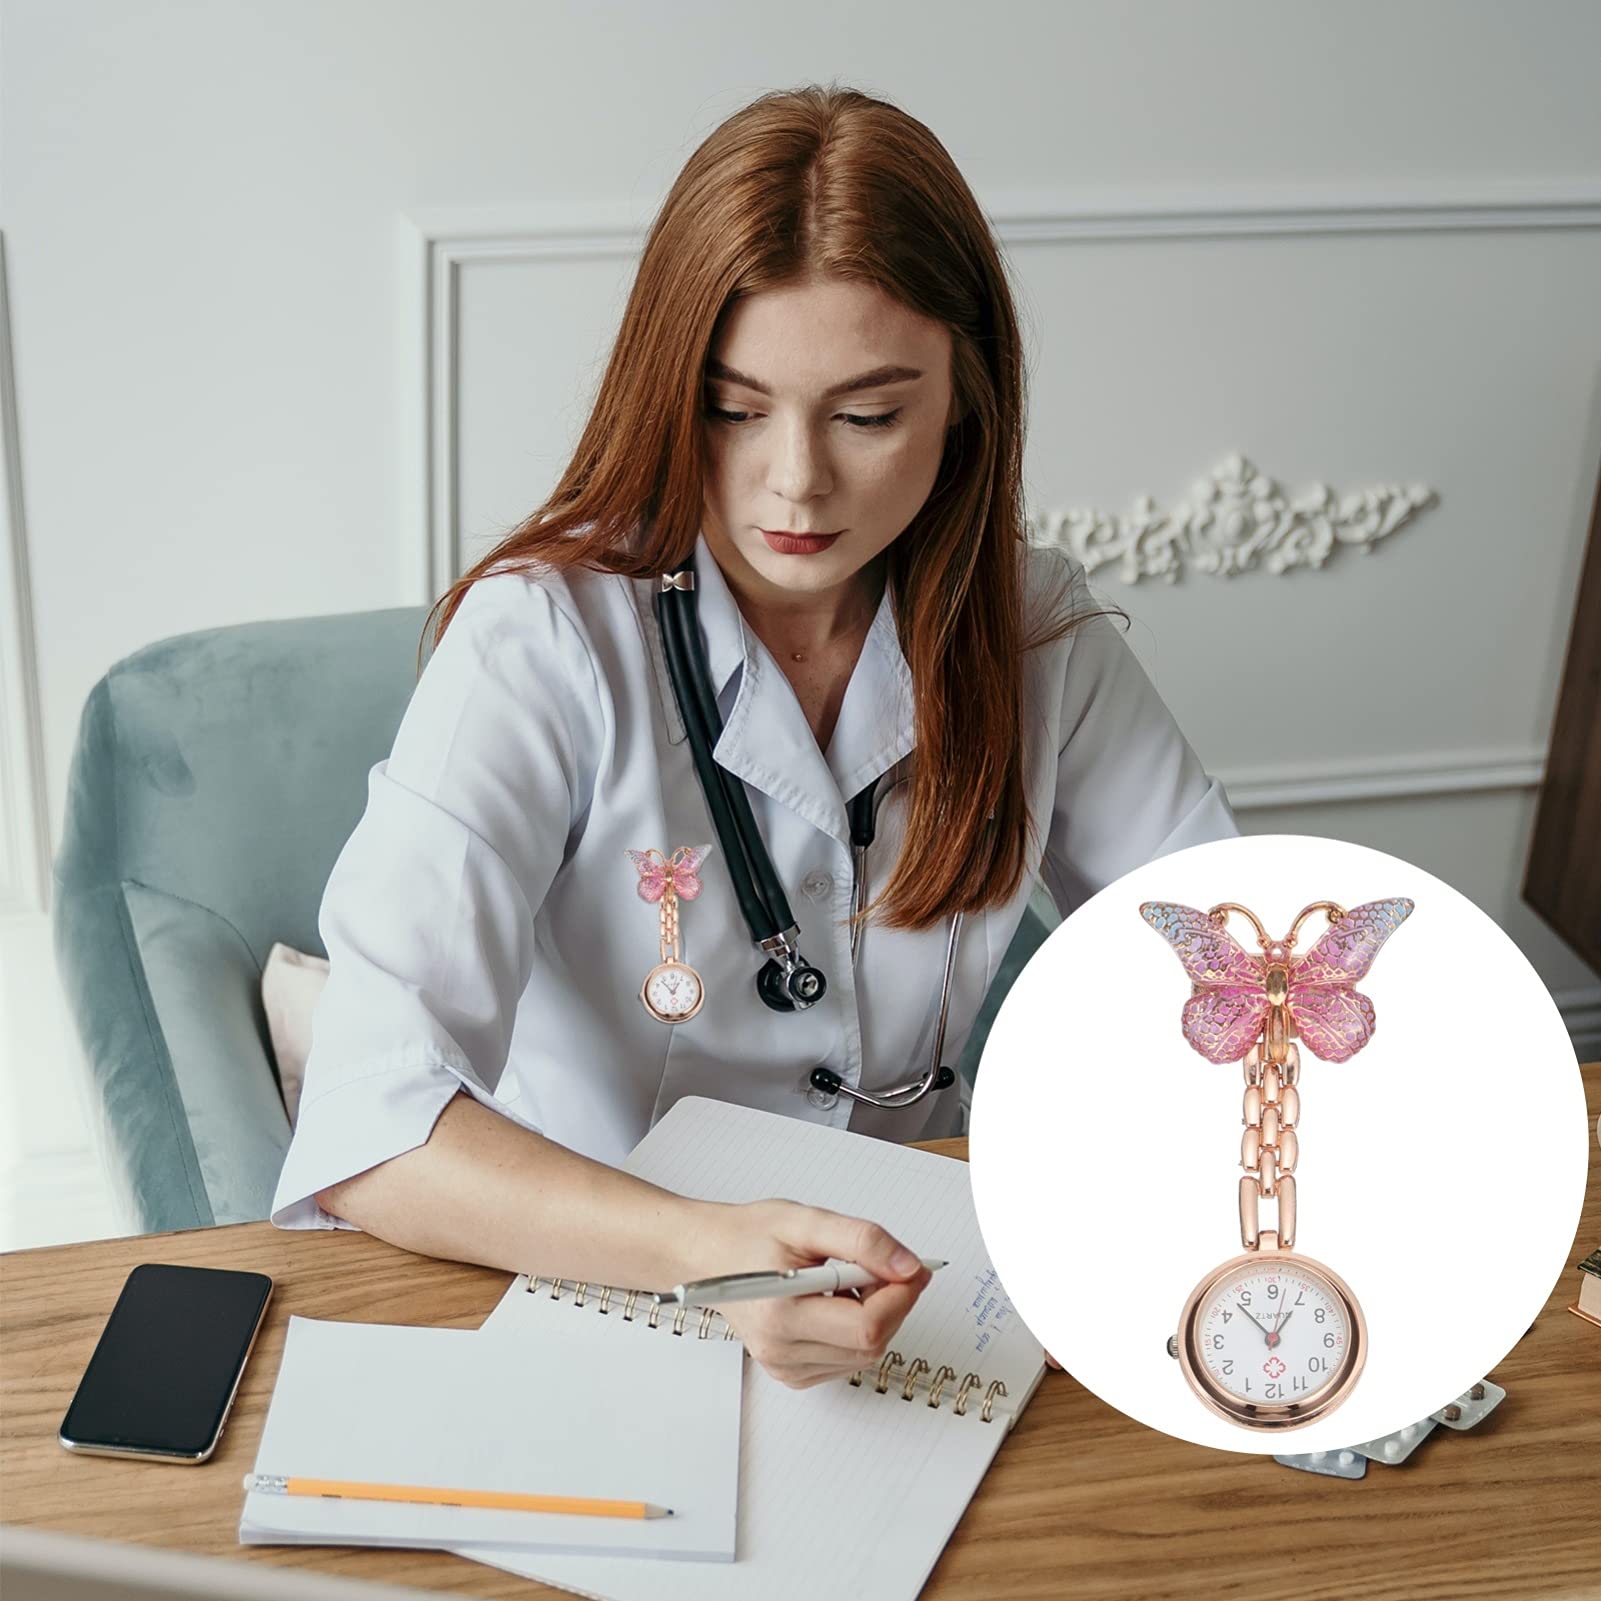 Hemobllo Nurse Watch with Butterfly Pattern Glass Lapel Watch Telescopic Quartz Watch Clip On Watch with Second Hand Stethoscope Badge Fob Medical Pocket Watch Jewelry Gift